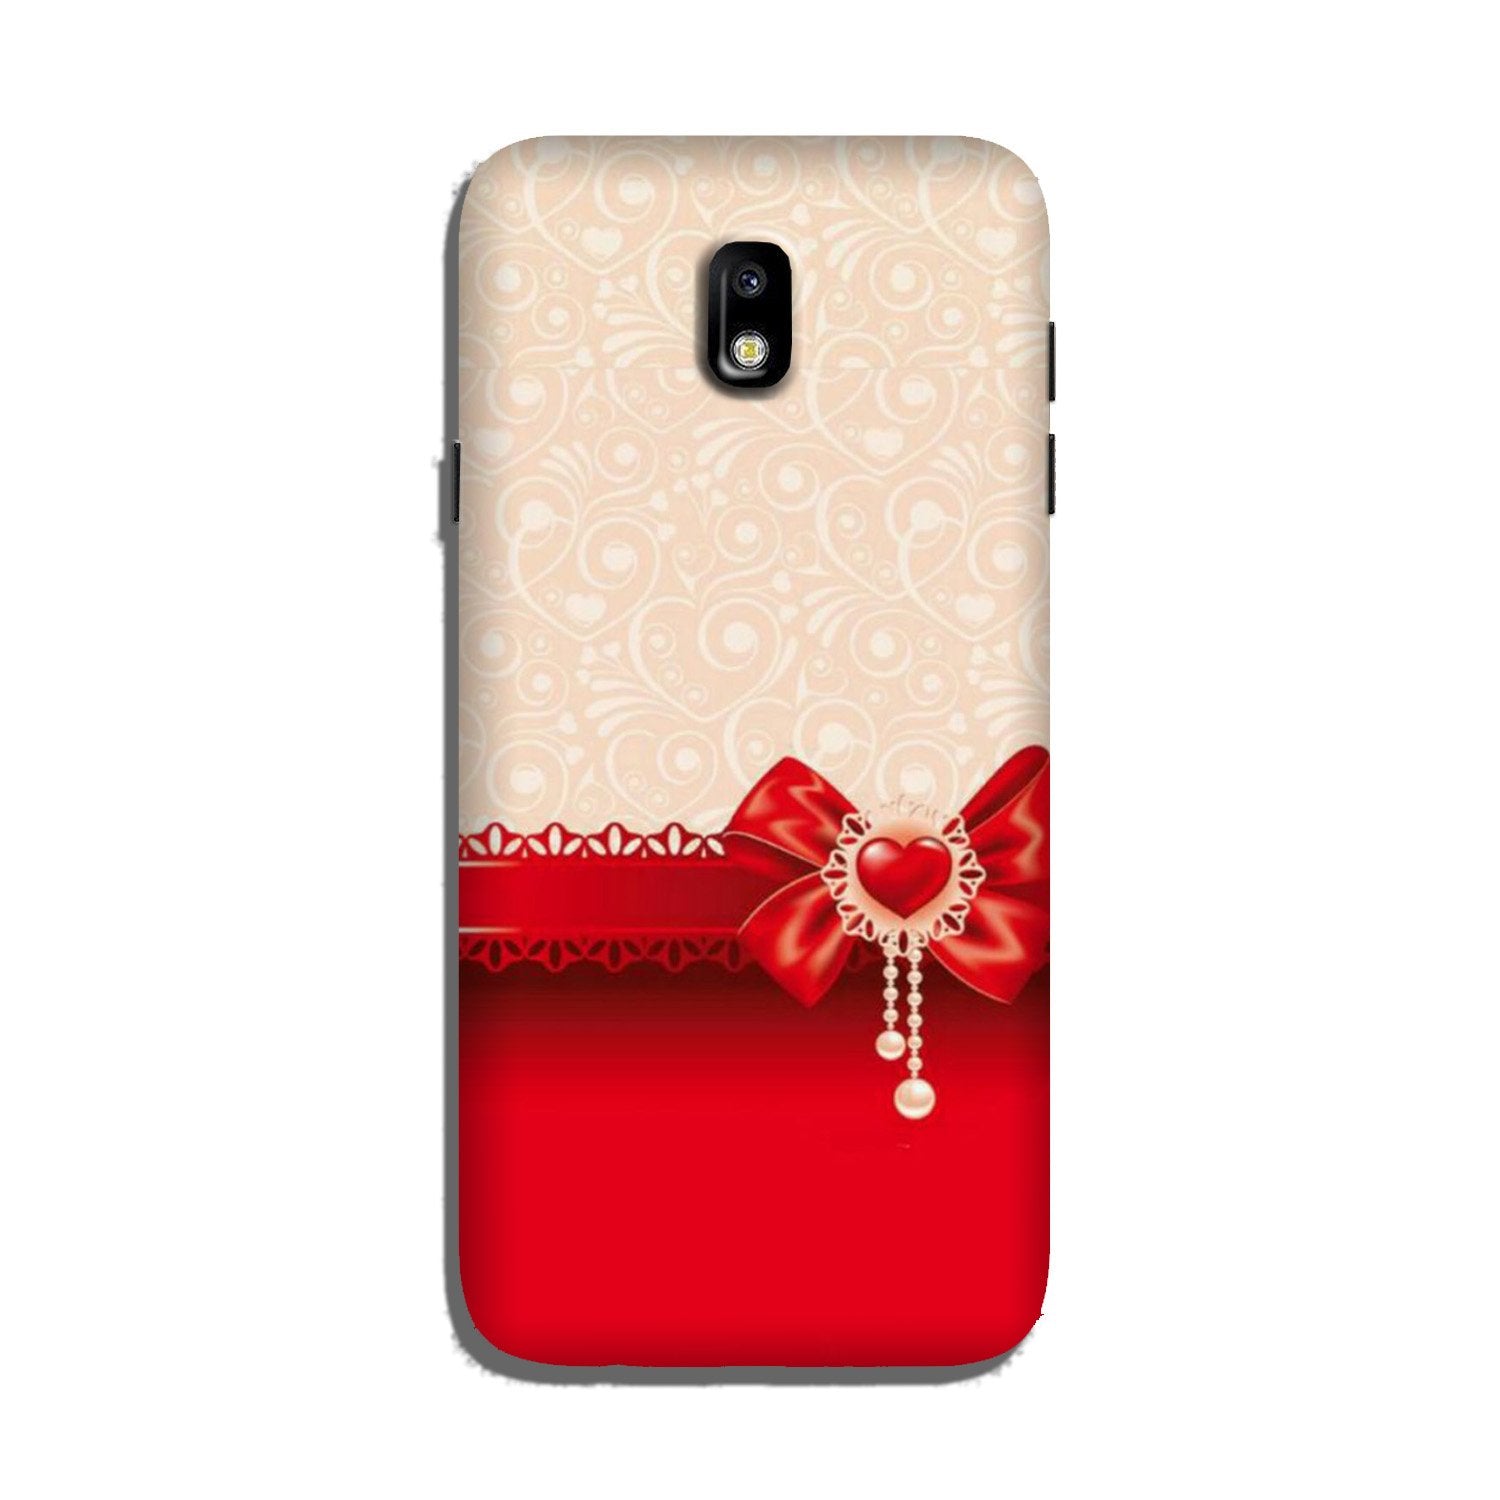 Gift Wrap3 Case for Galaxy J5 Pro